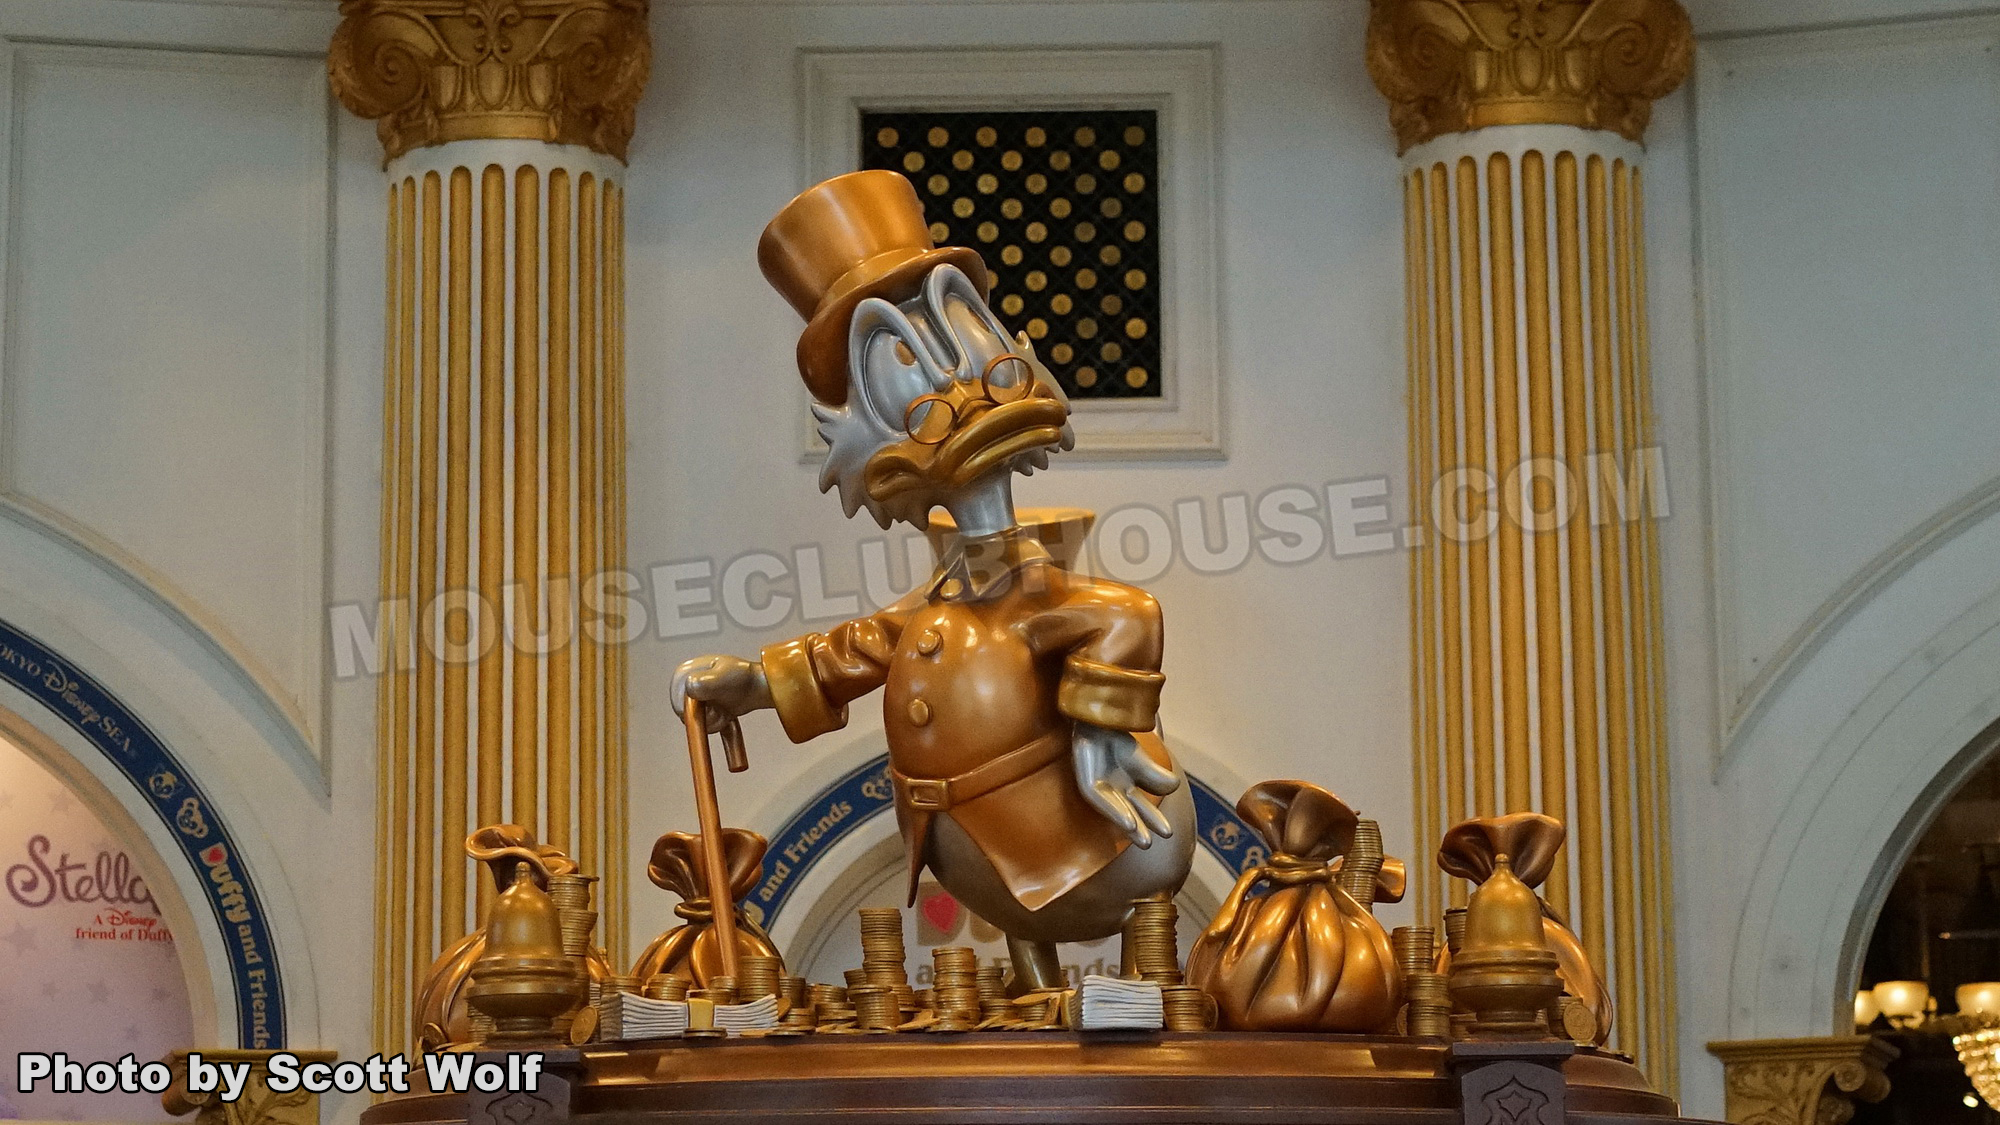 Scrooge McDuck is showcased in the center of the store